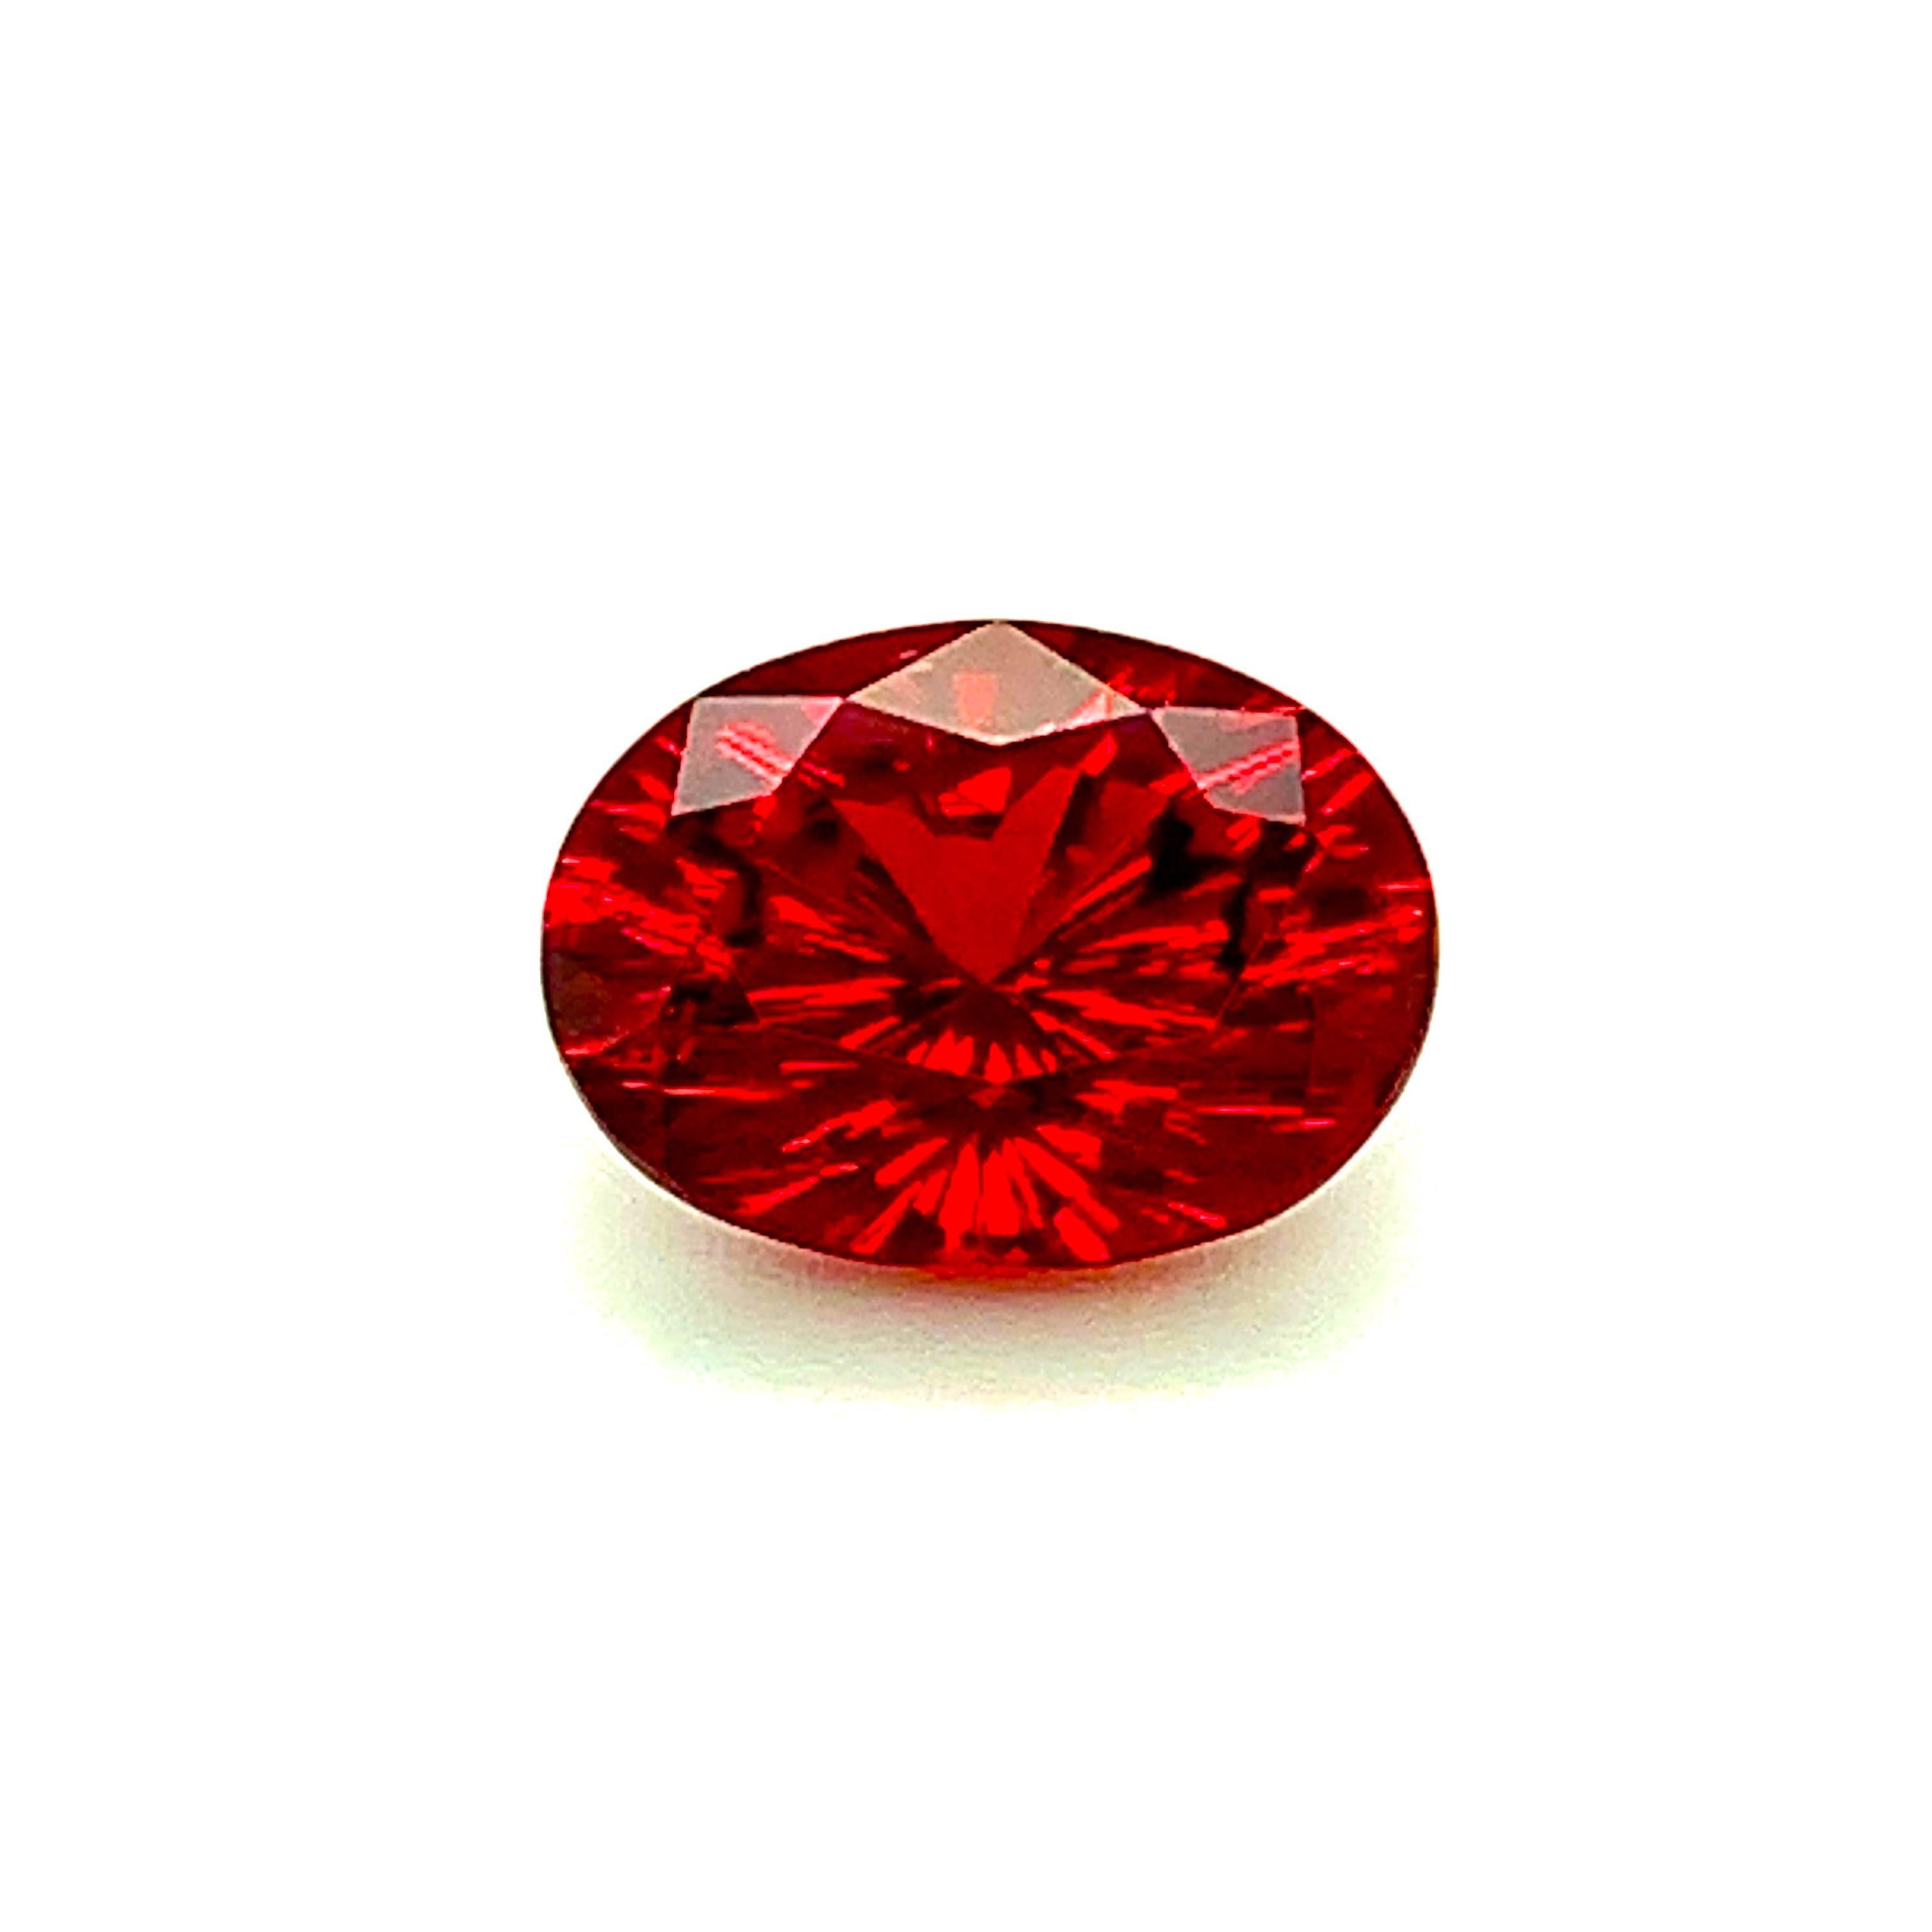 Unheated 4.84 Carat Red Spinel Oval, Unset Loose Gemstone, GIA Certified 7